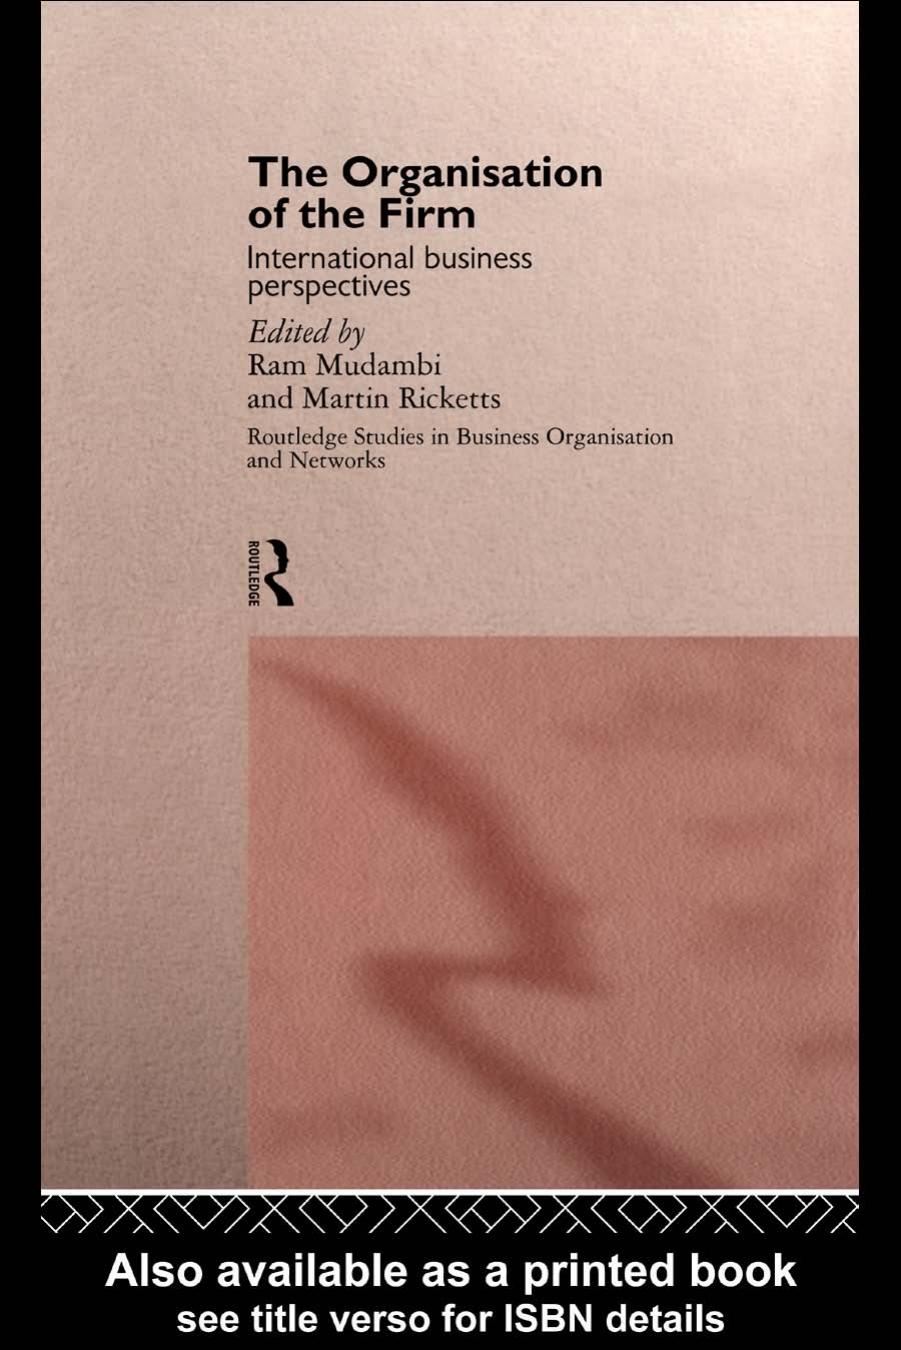 THE ORGANISATION OF THE FIRM: International business perspectives